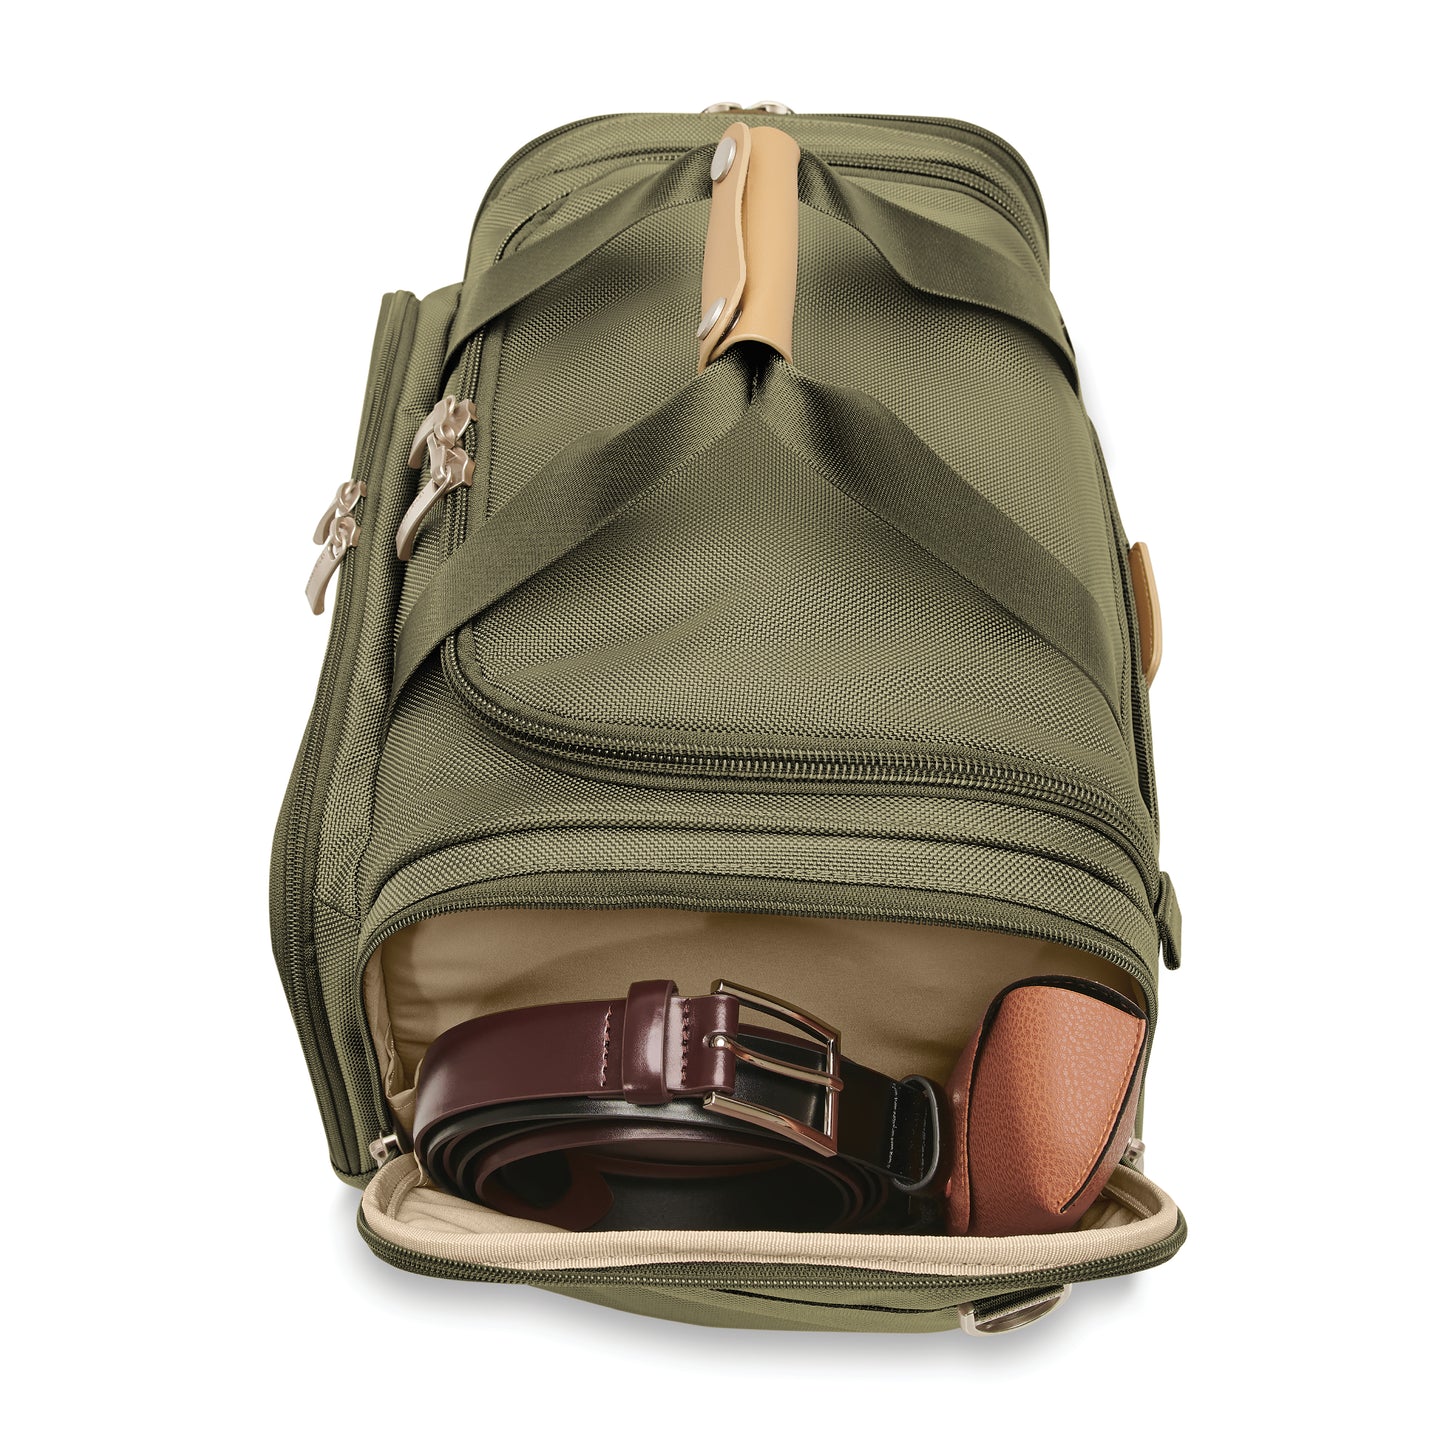 Briggs & Riley Baseline Underseat Carry-On Duffle